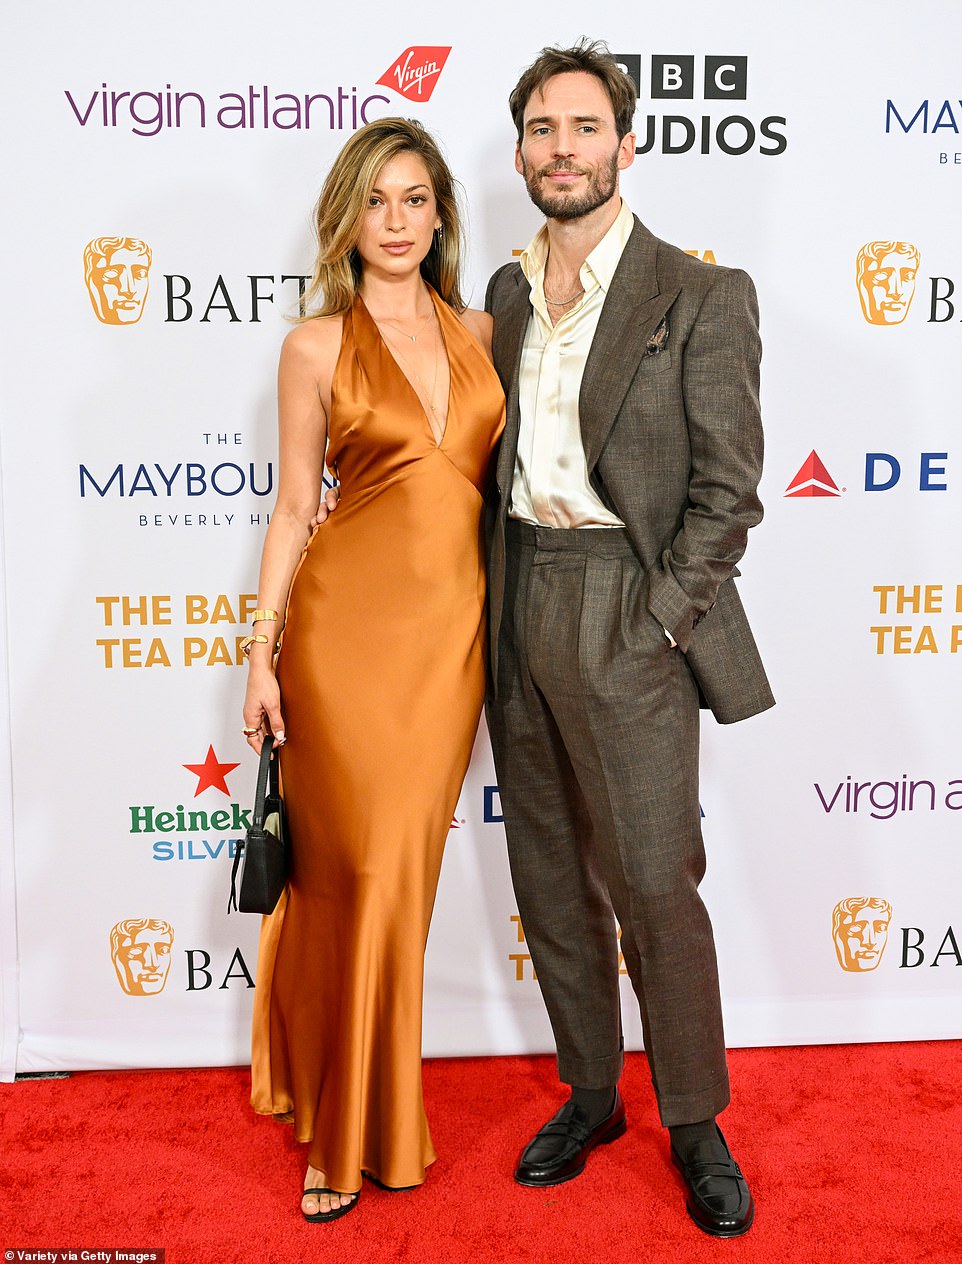 Cassie Amato donned a satin gold dress while Sam Claflin opted for a stylish, dark brown suit as they attended the event